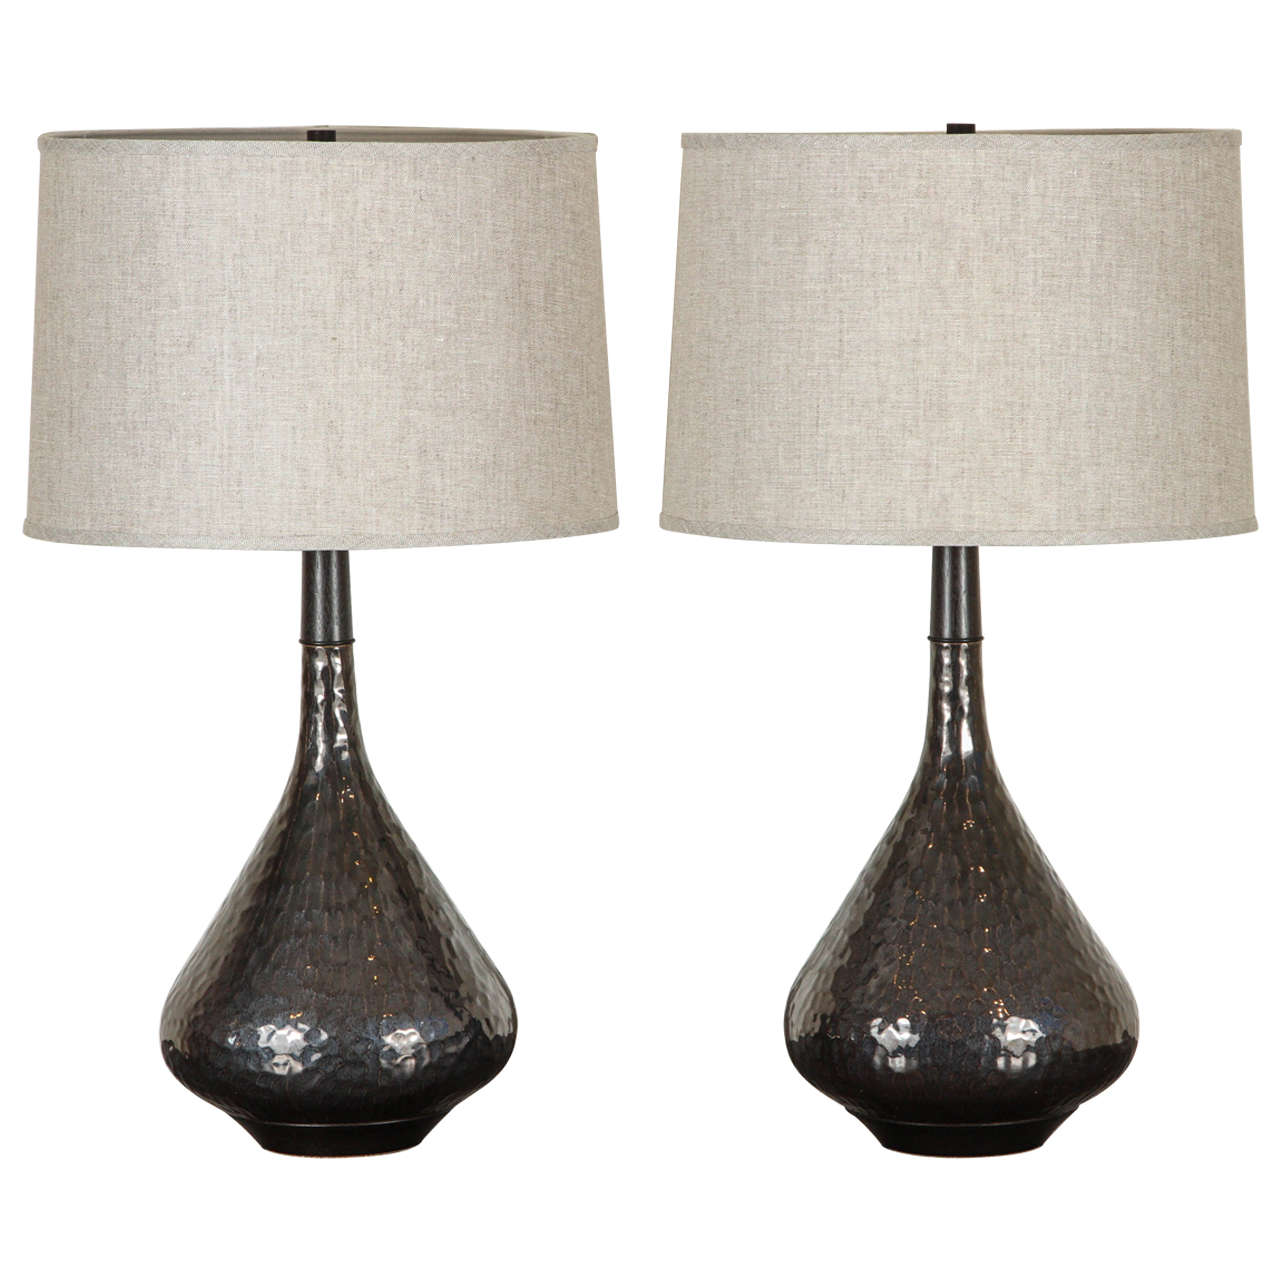 Carved Miller Lamp in Anthracite by Stone and Sawyer